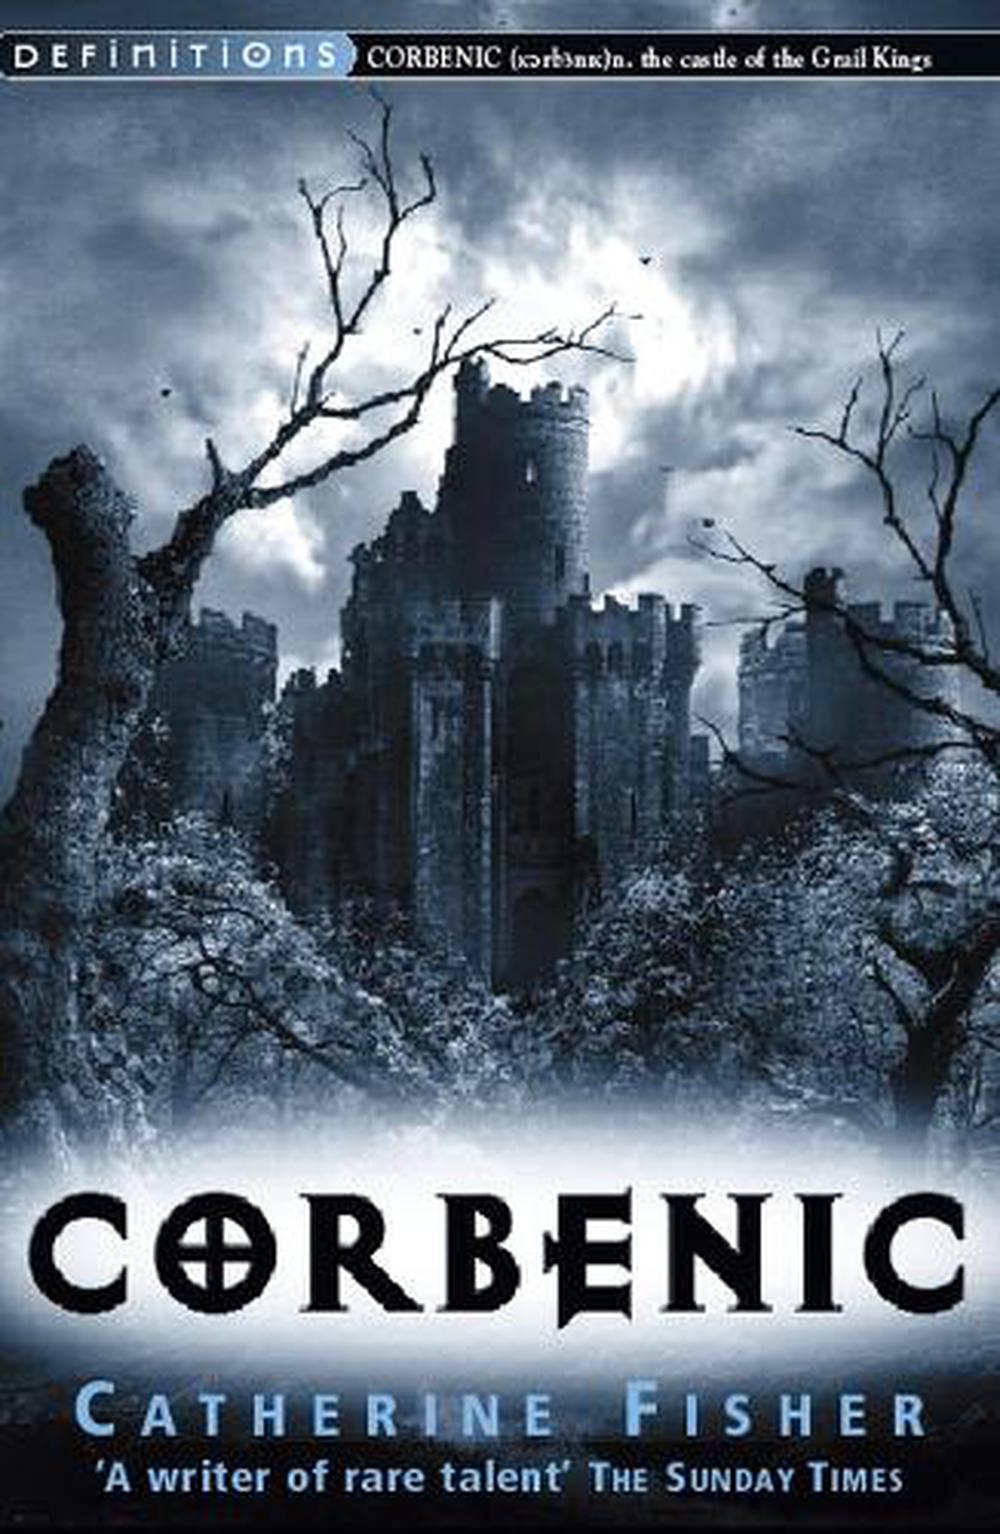 Corbenic by Catherine Fisher